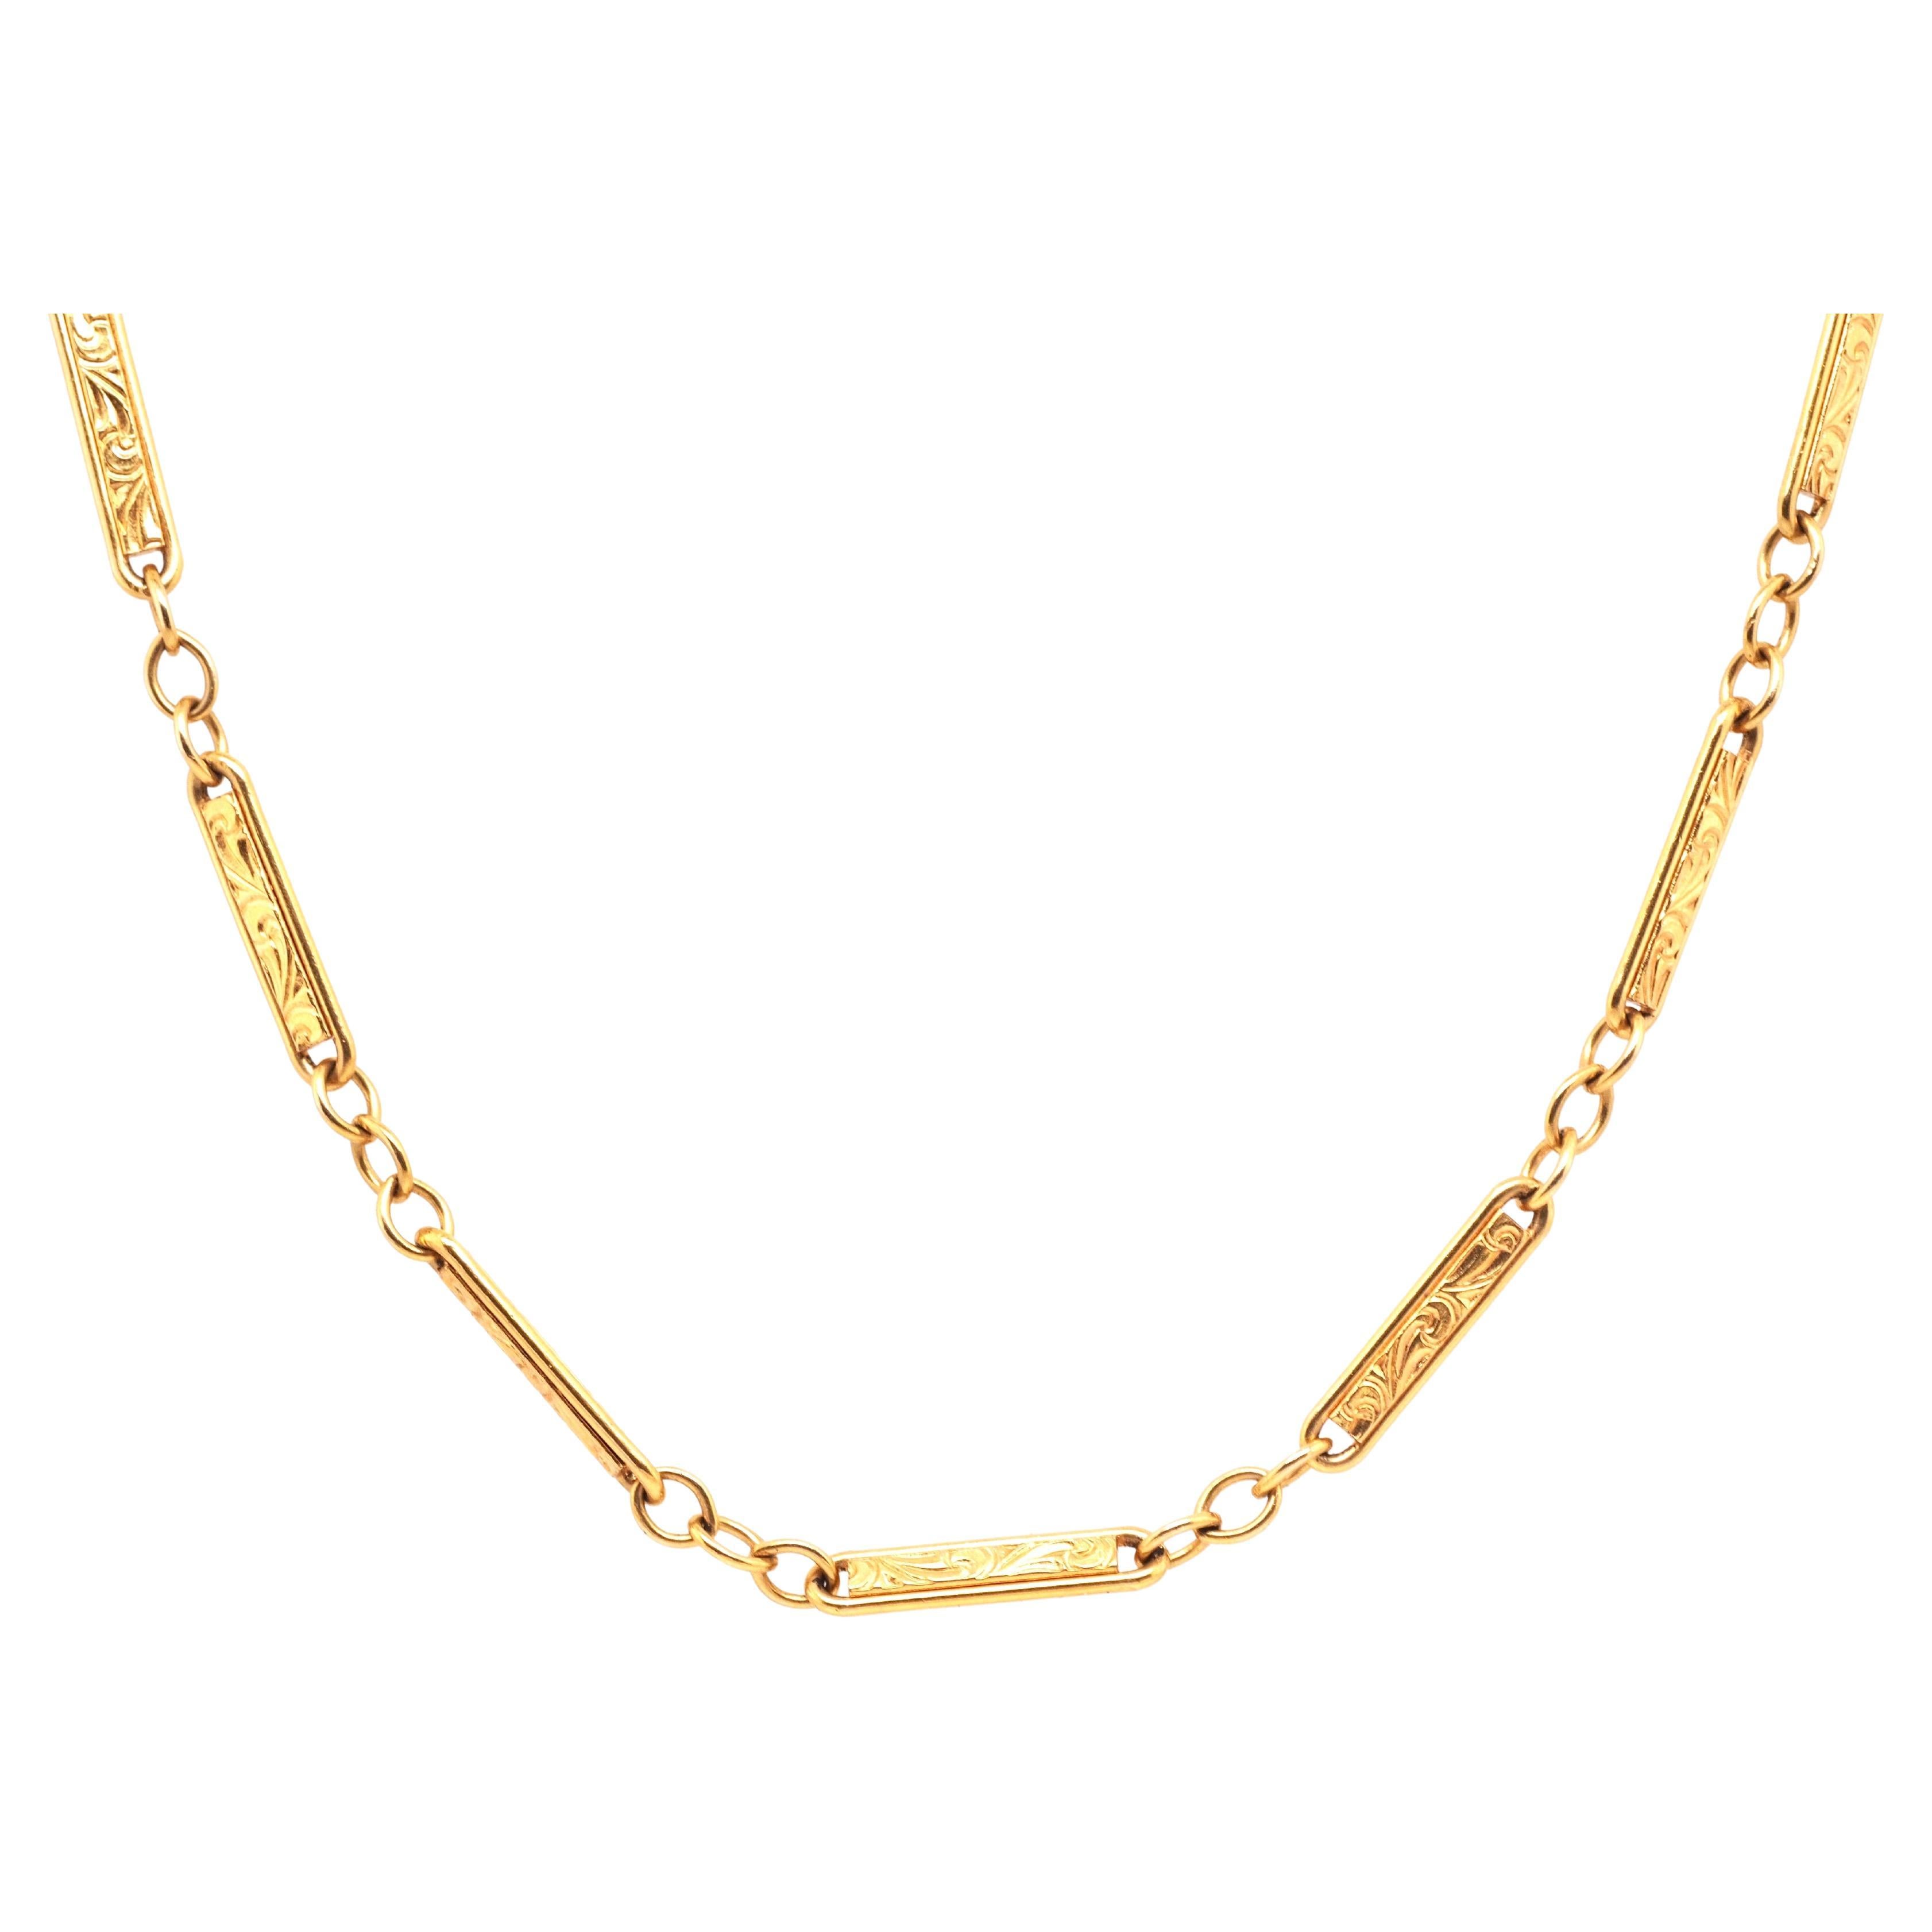 Circa 1910s Edwardian 14K Yellow Gold 26.5 Inch Engraved Link Necklace Chain For Sale